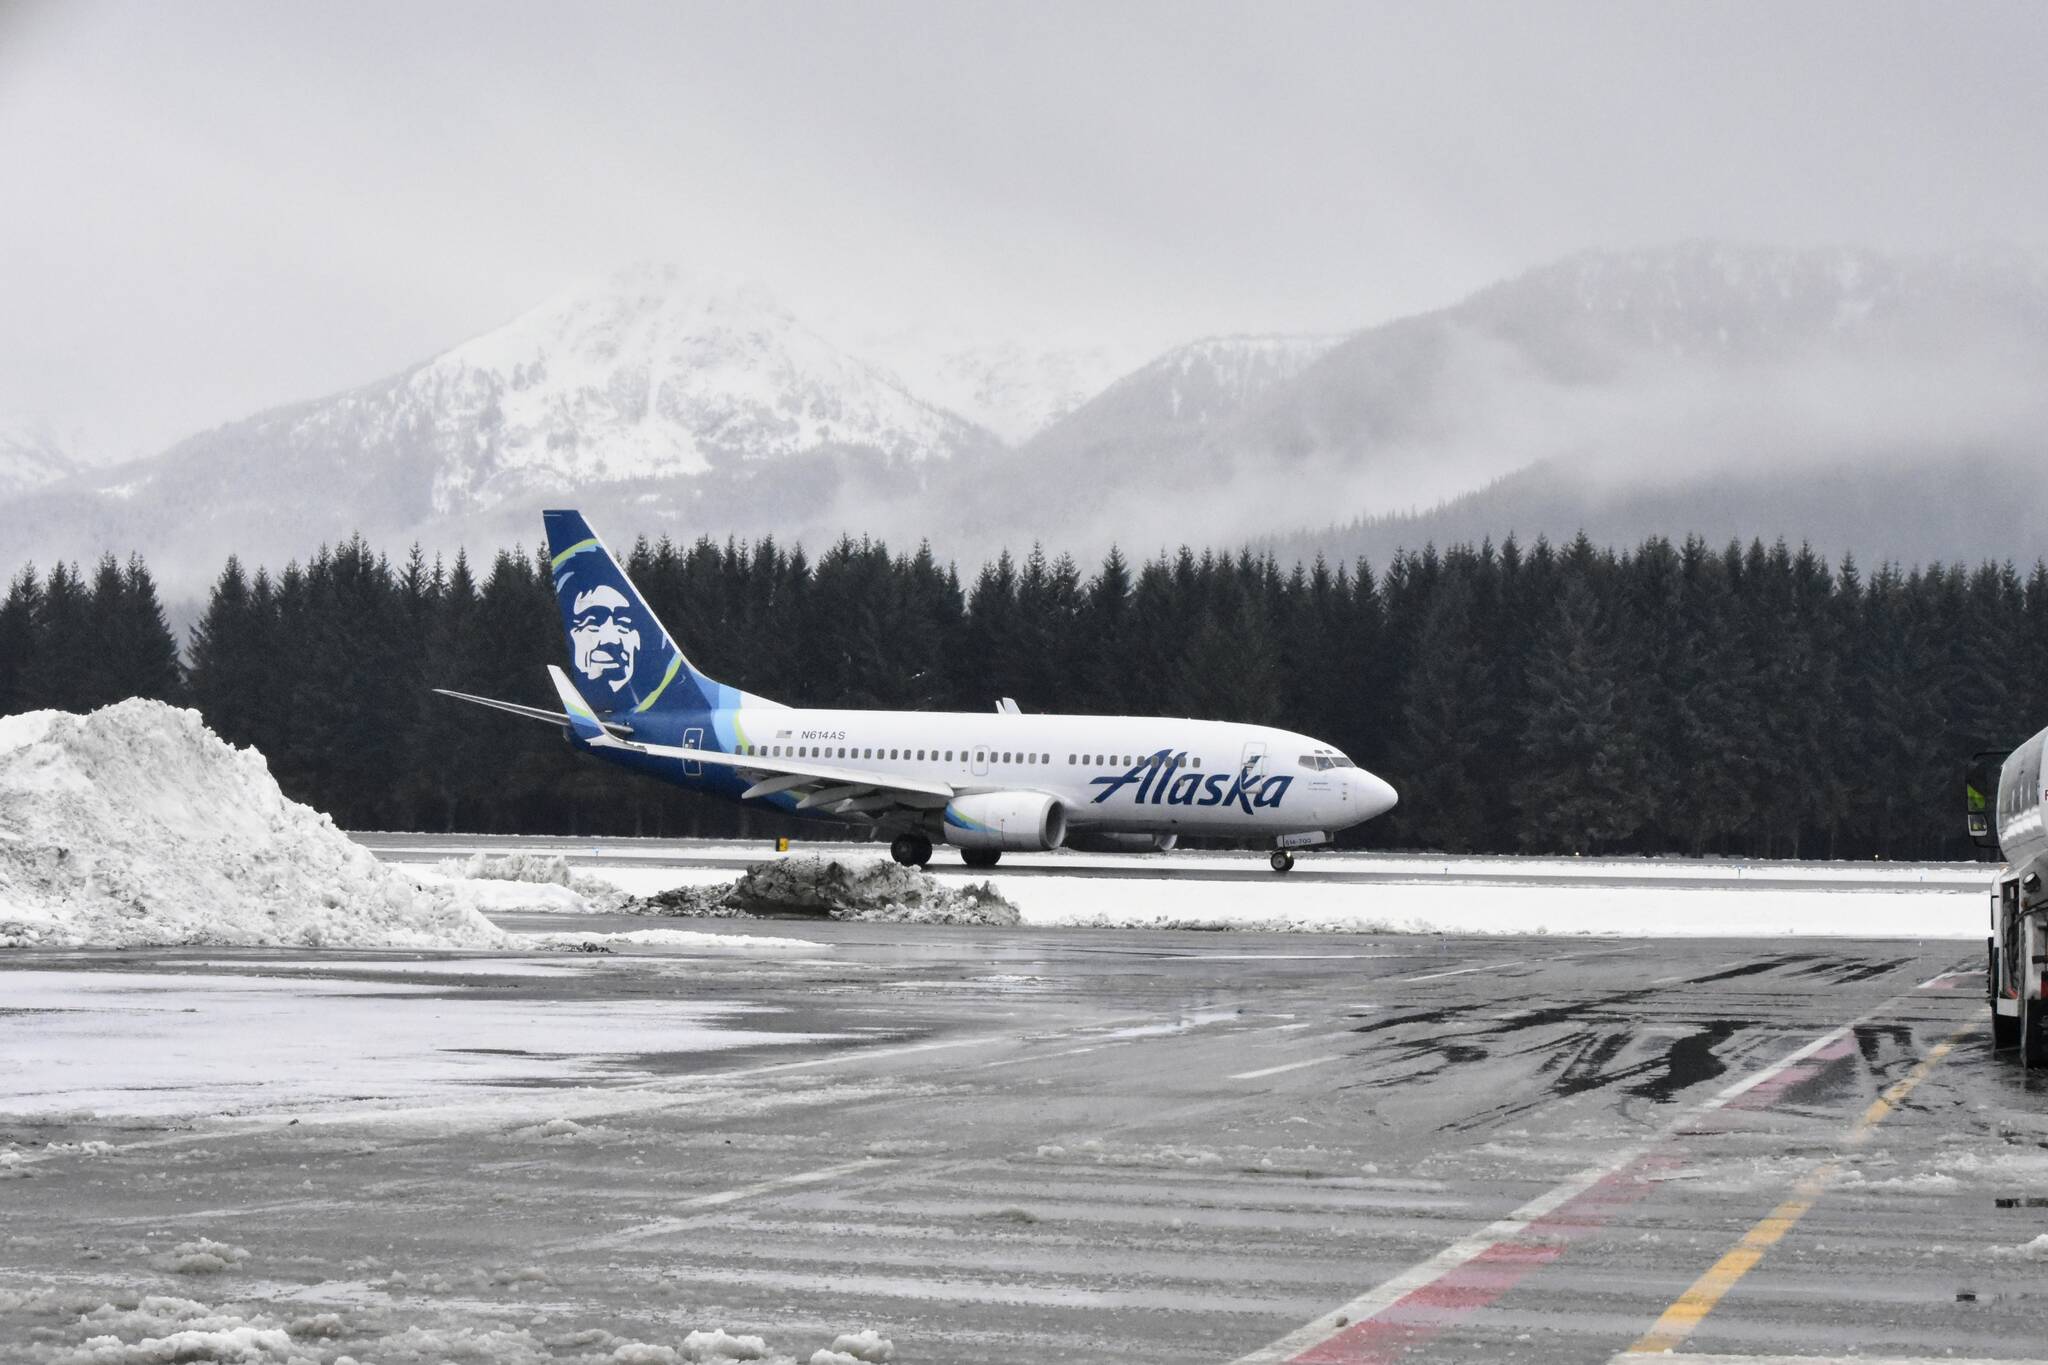 An Alaska Airlines flight lands at the Juneau International Airport on Monday, Nov. 22, 2021, amid a day of rain and snow. According to an airlines spokesperson, air travel this holiday season has rebounded to about 85% of what it was before the pandemic. (Peter Segall / Juneau Empire File)